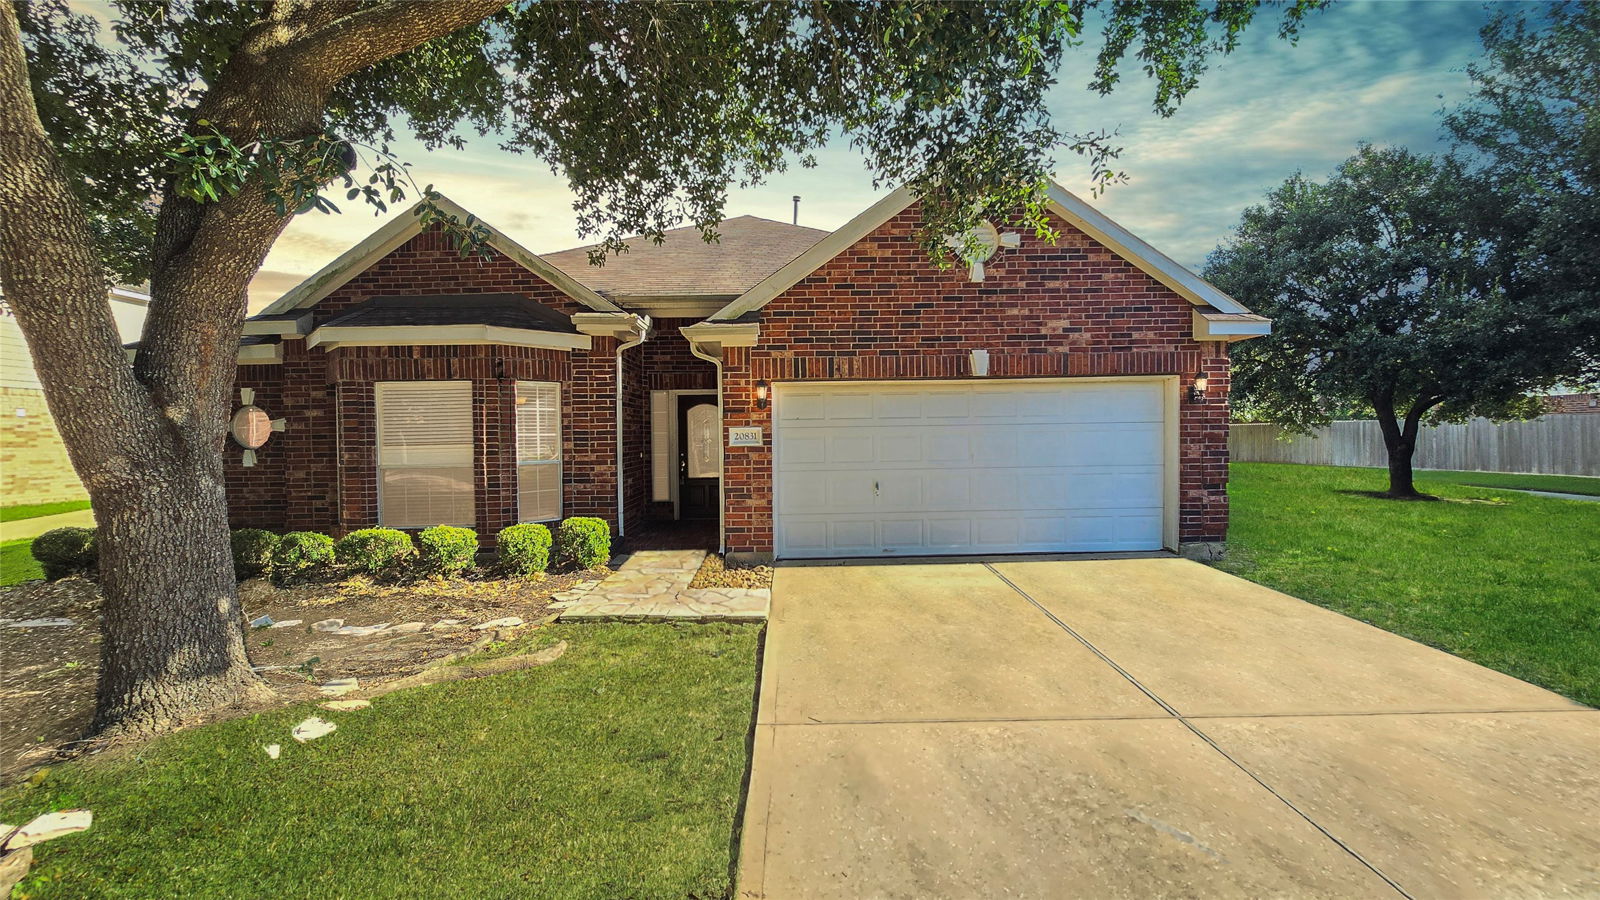 Cypress 1-story, 3-bed 20831 Ochre Willow Trail-idx